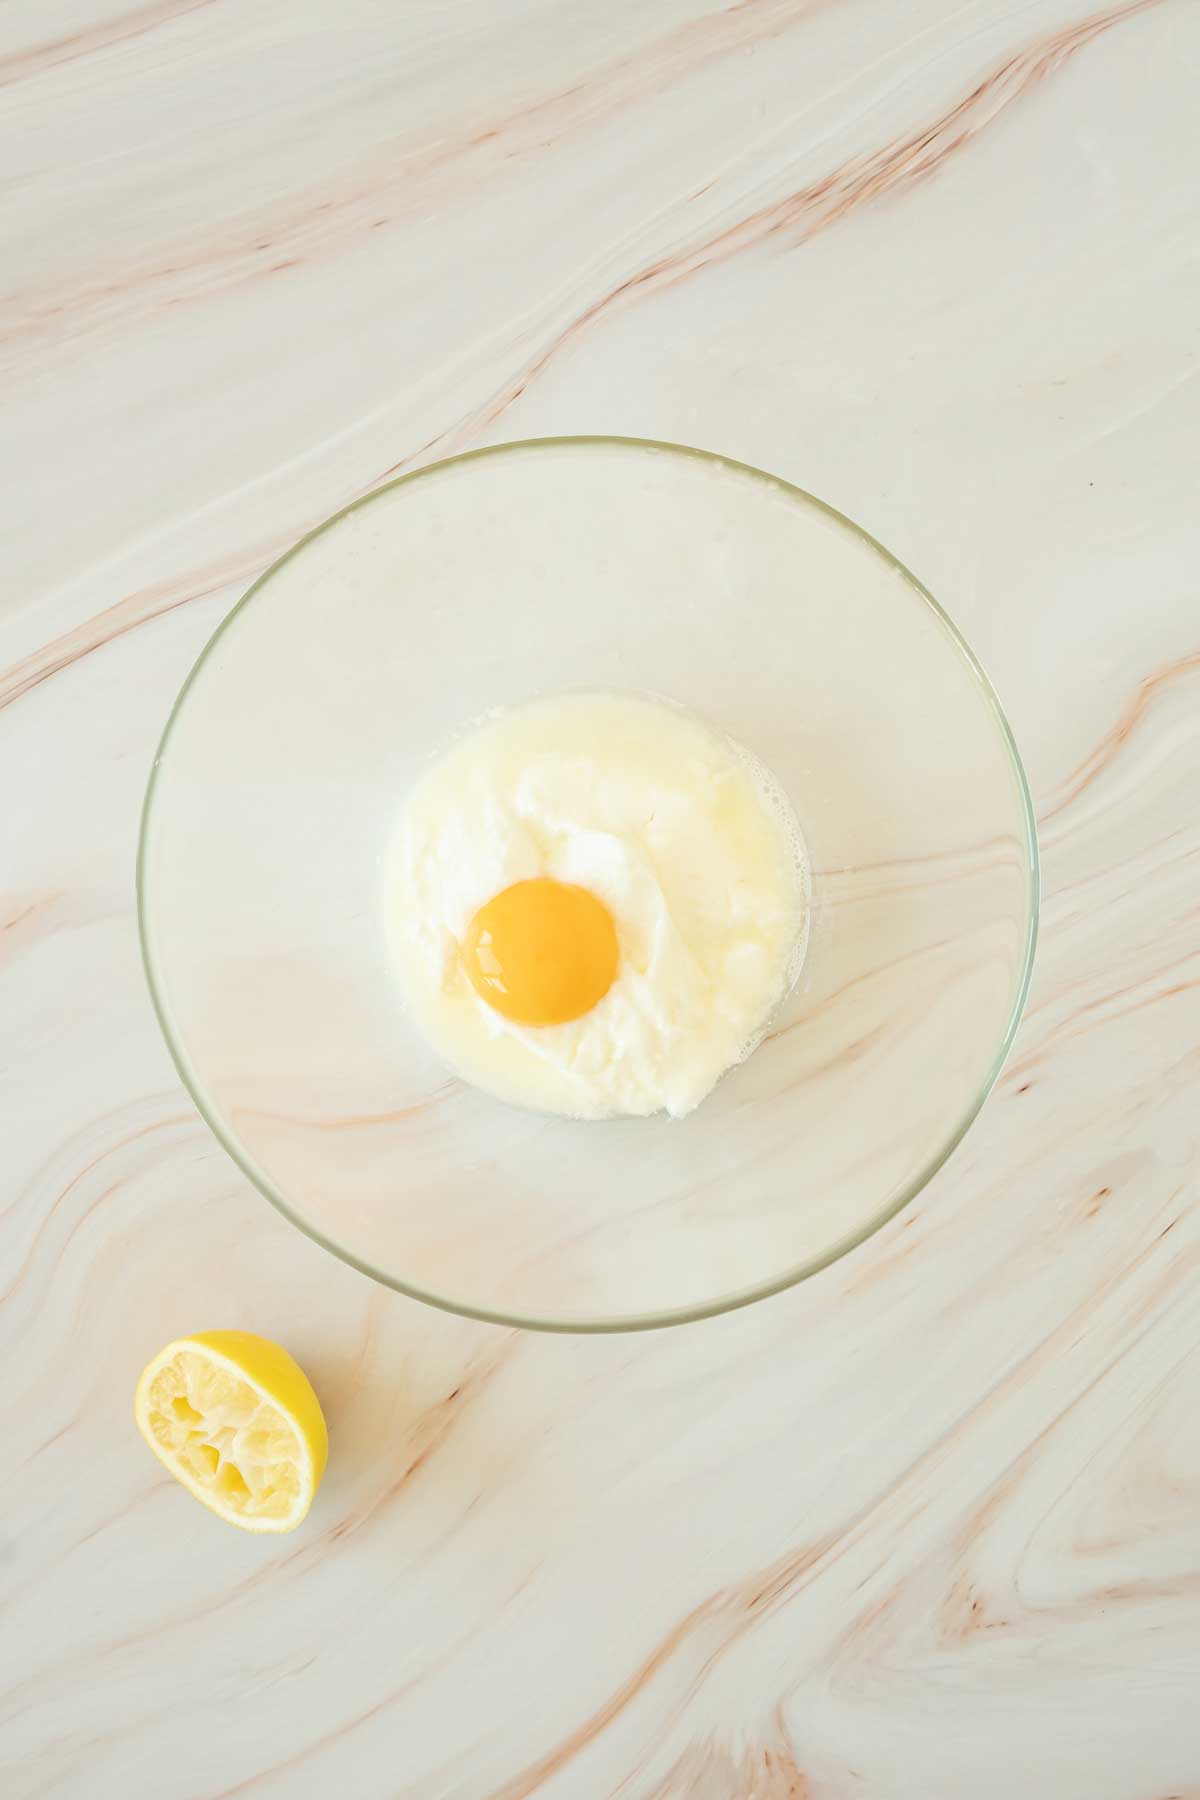 An egg in a glass bowl on a marble surface.